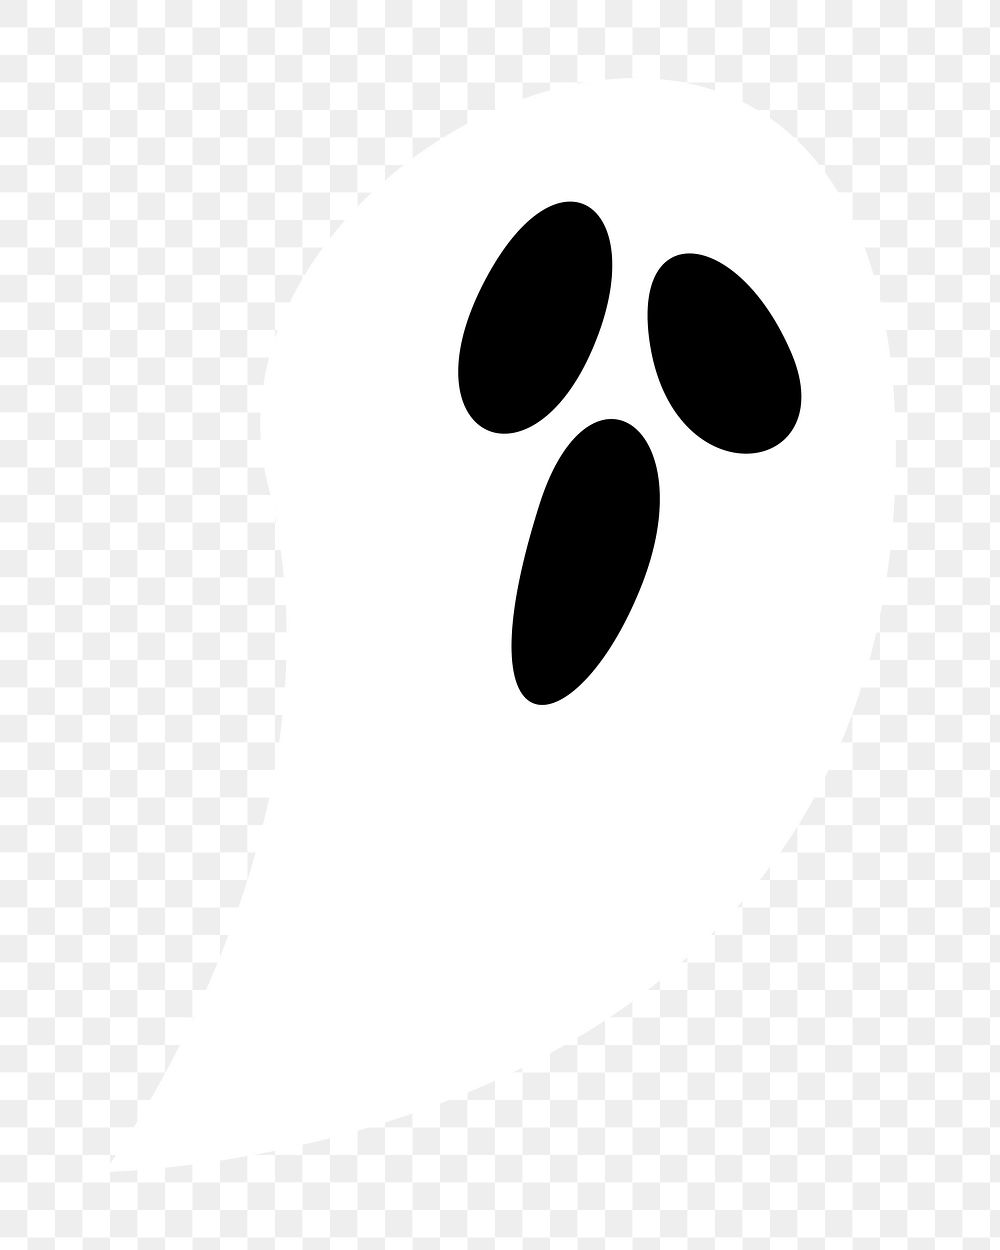 Ghost Halloween png illustration, transparent background. Free public domain CC0 image.